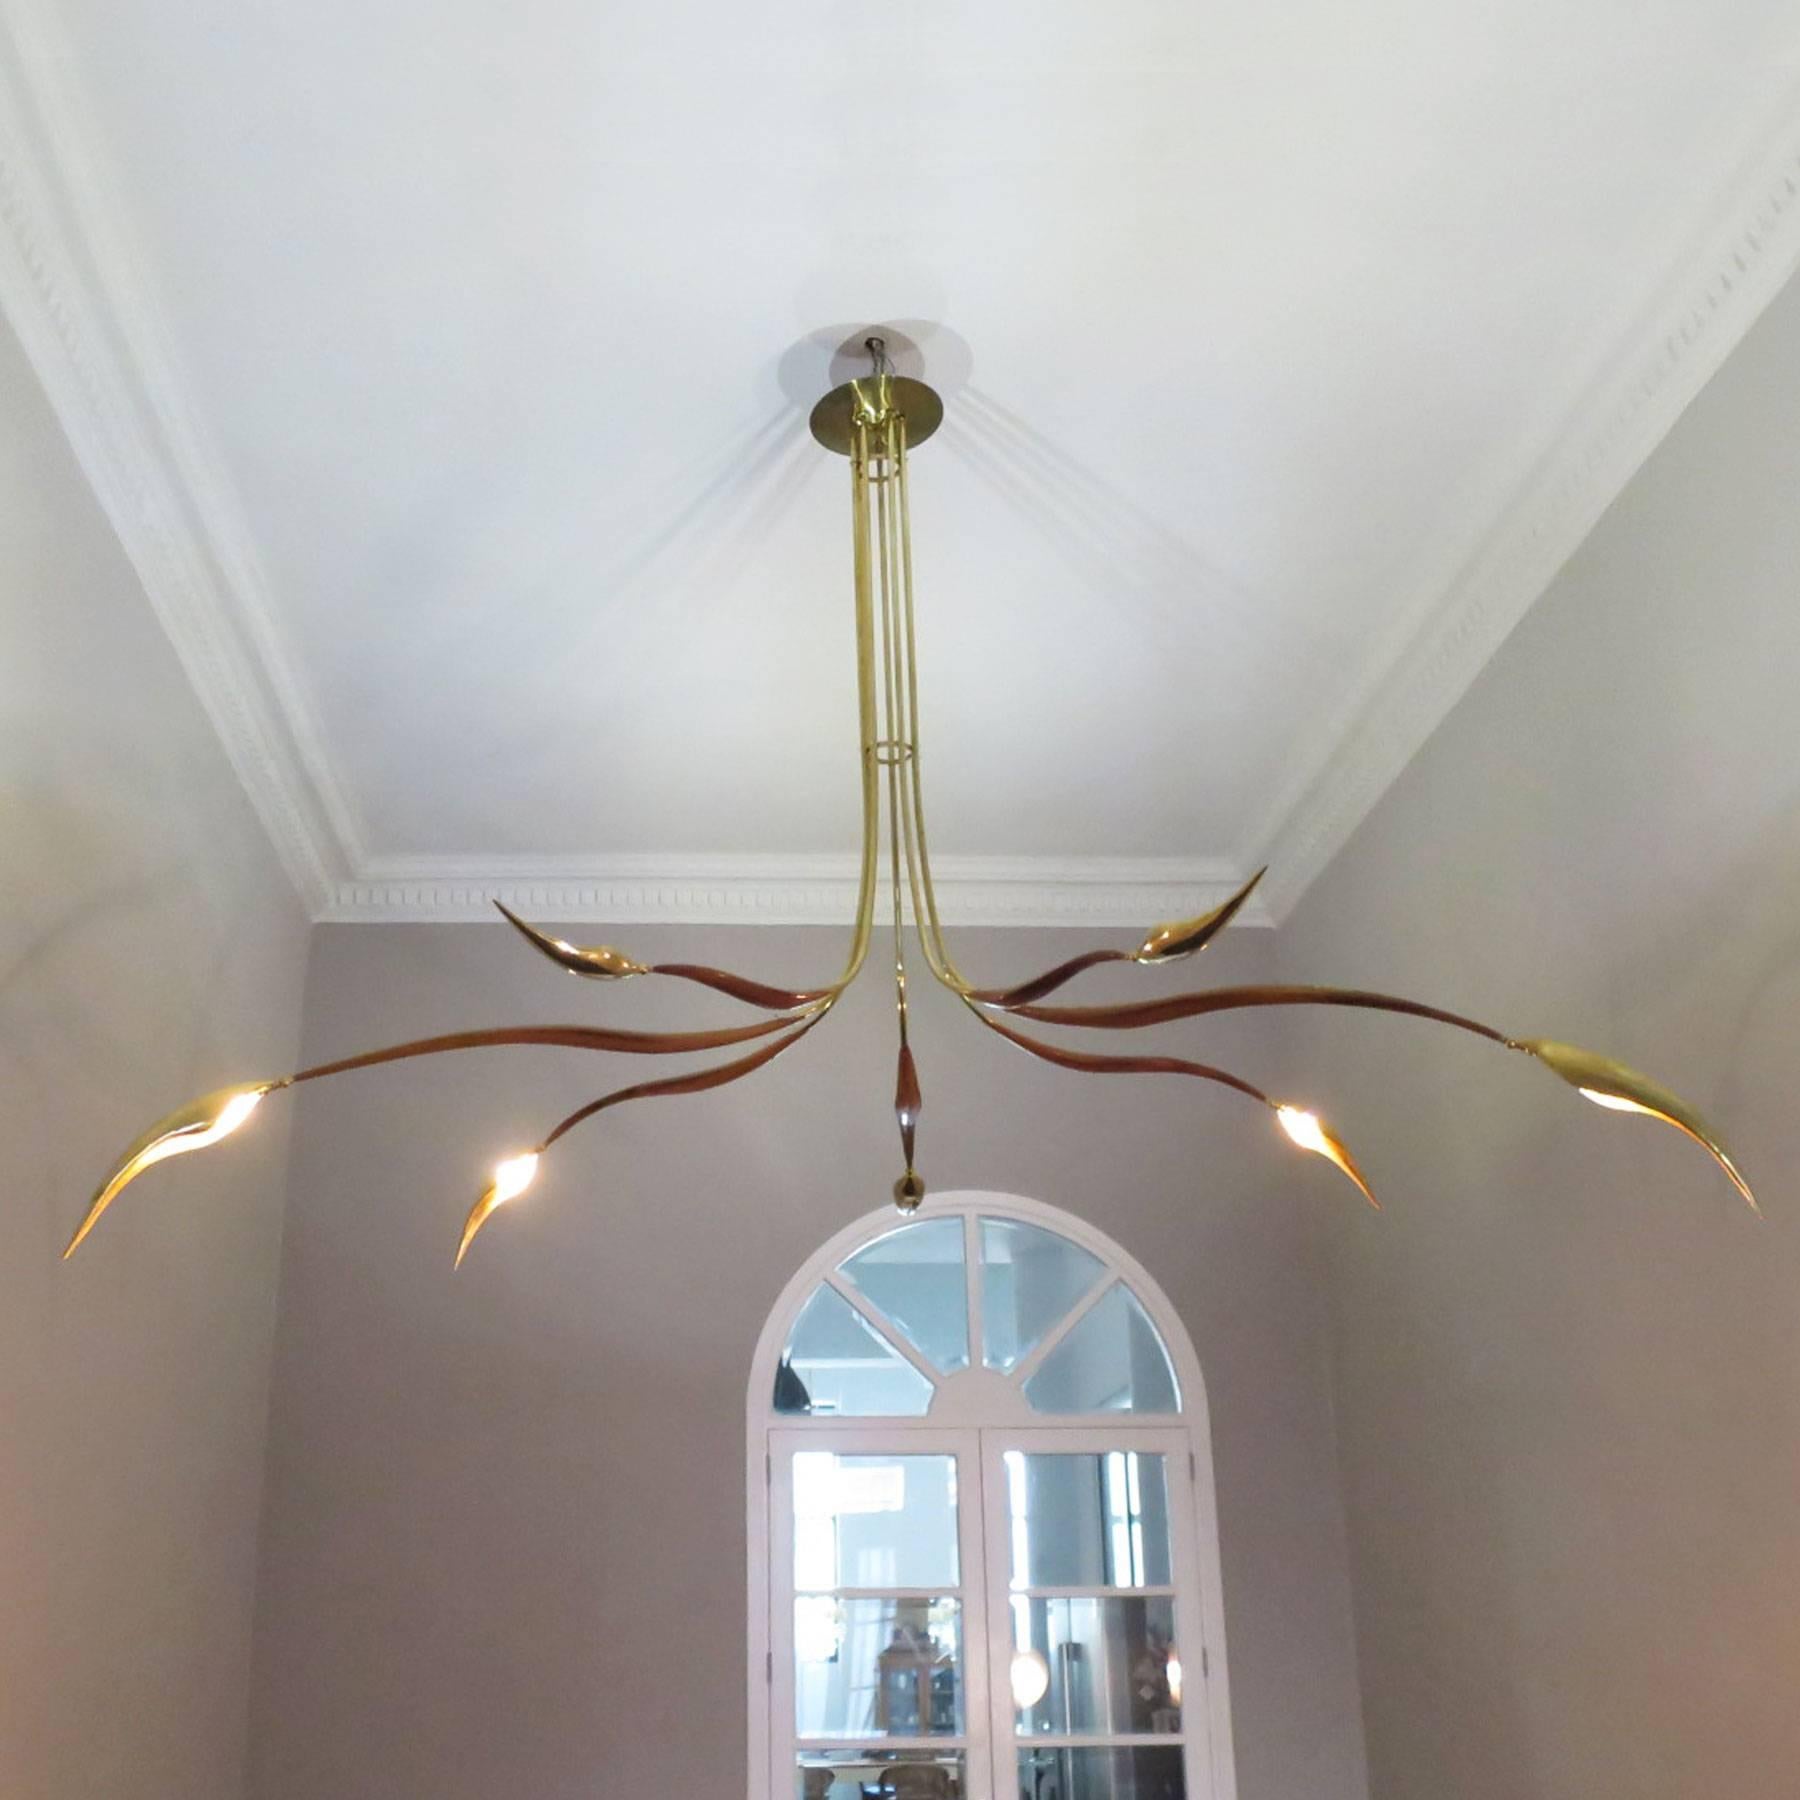 Hand-Carved Contemporary Chrysalide Chandelier, Wood and Brass, Oma Light Design, Spain For Sale